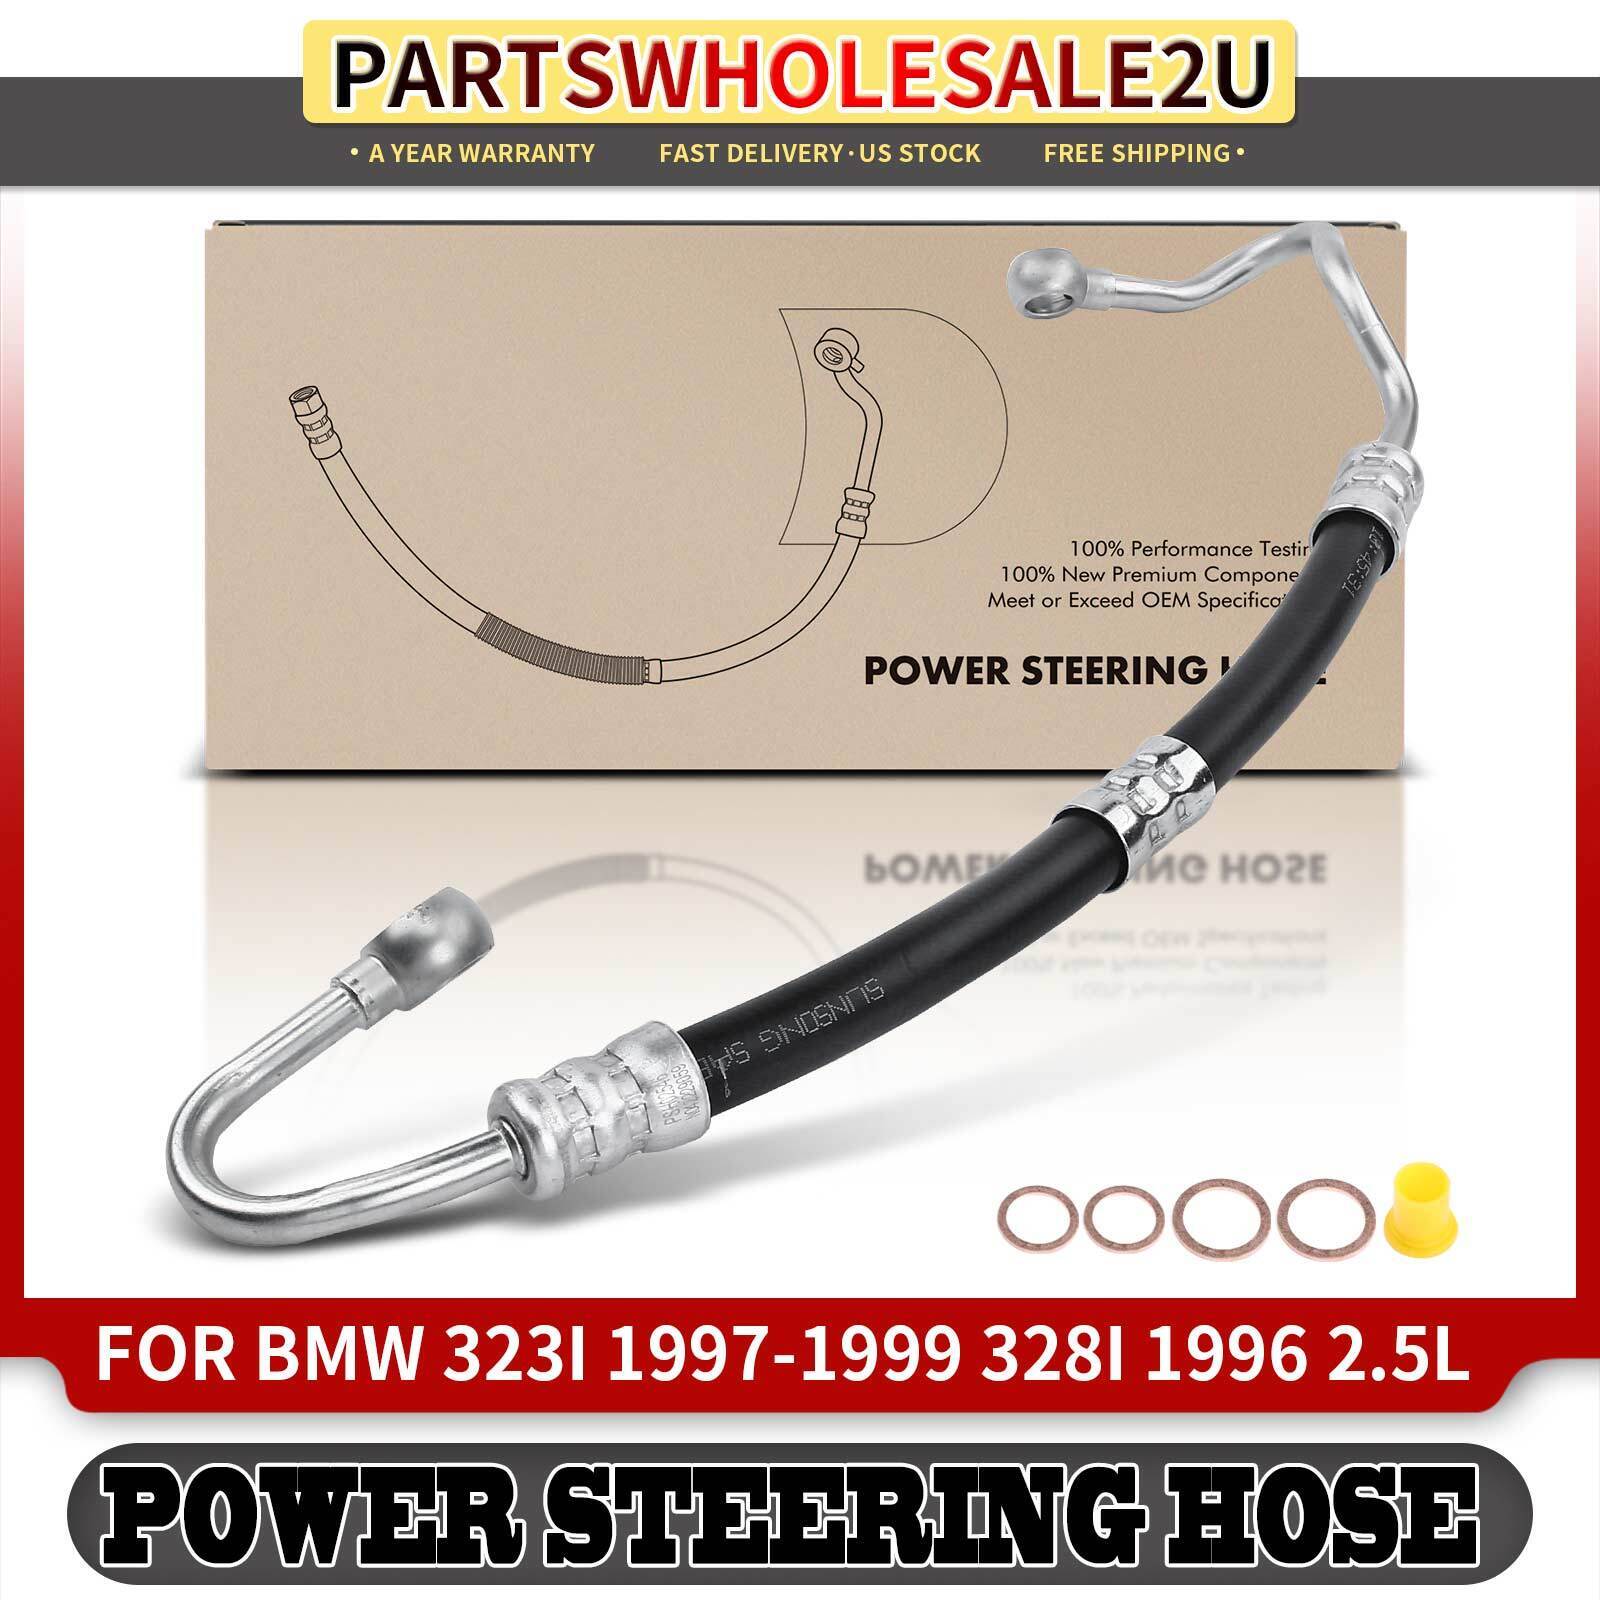 New Power Steering Pressure Line Hose Assembly for BMW E36 323i 323is 328i 328is